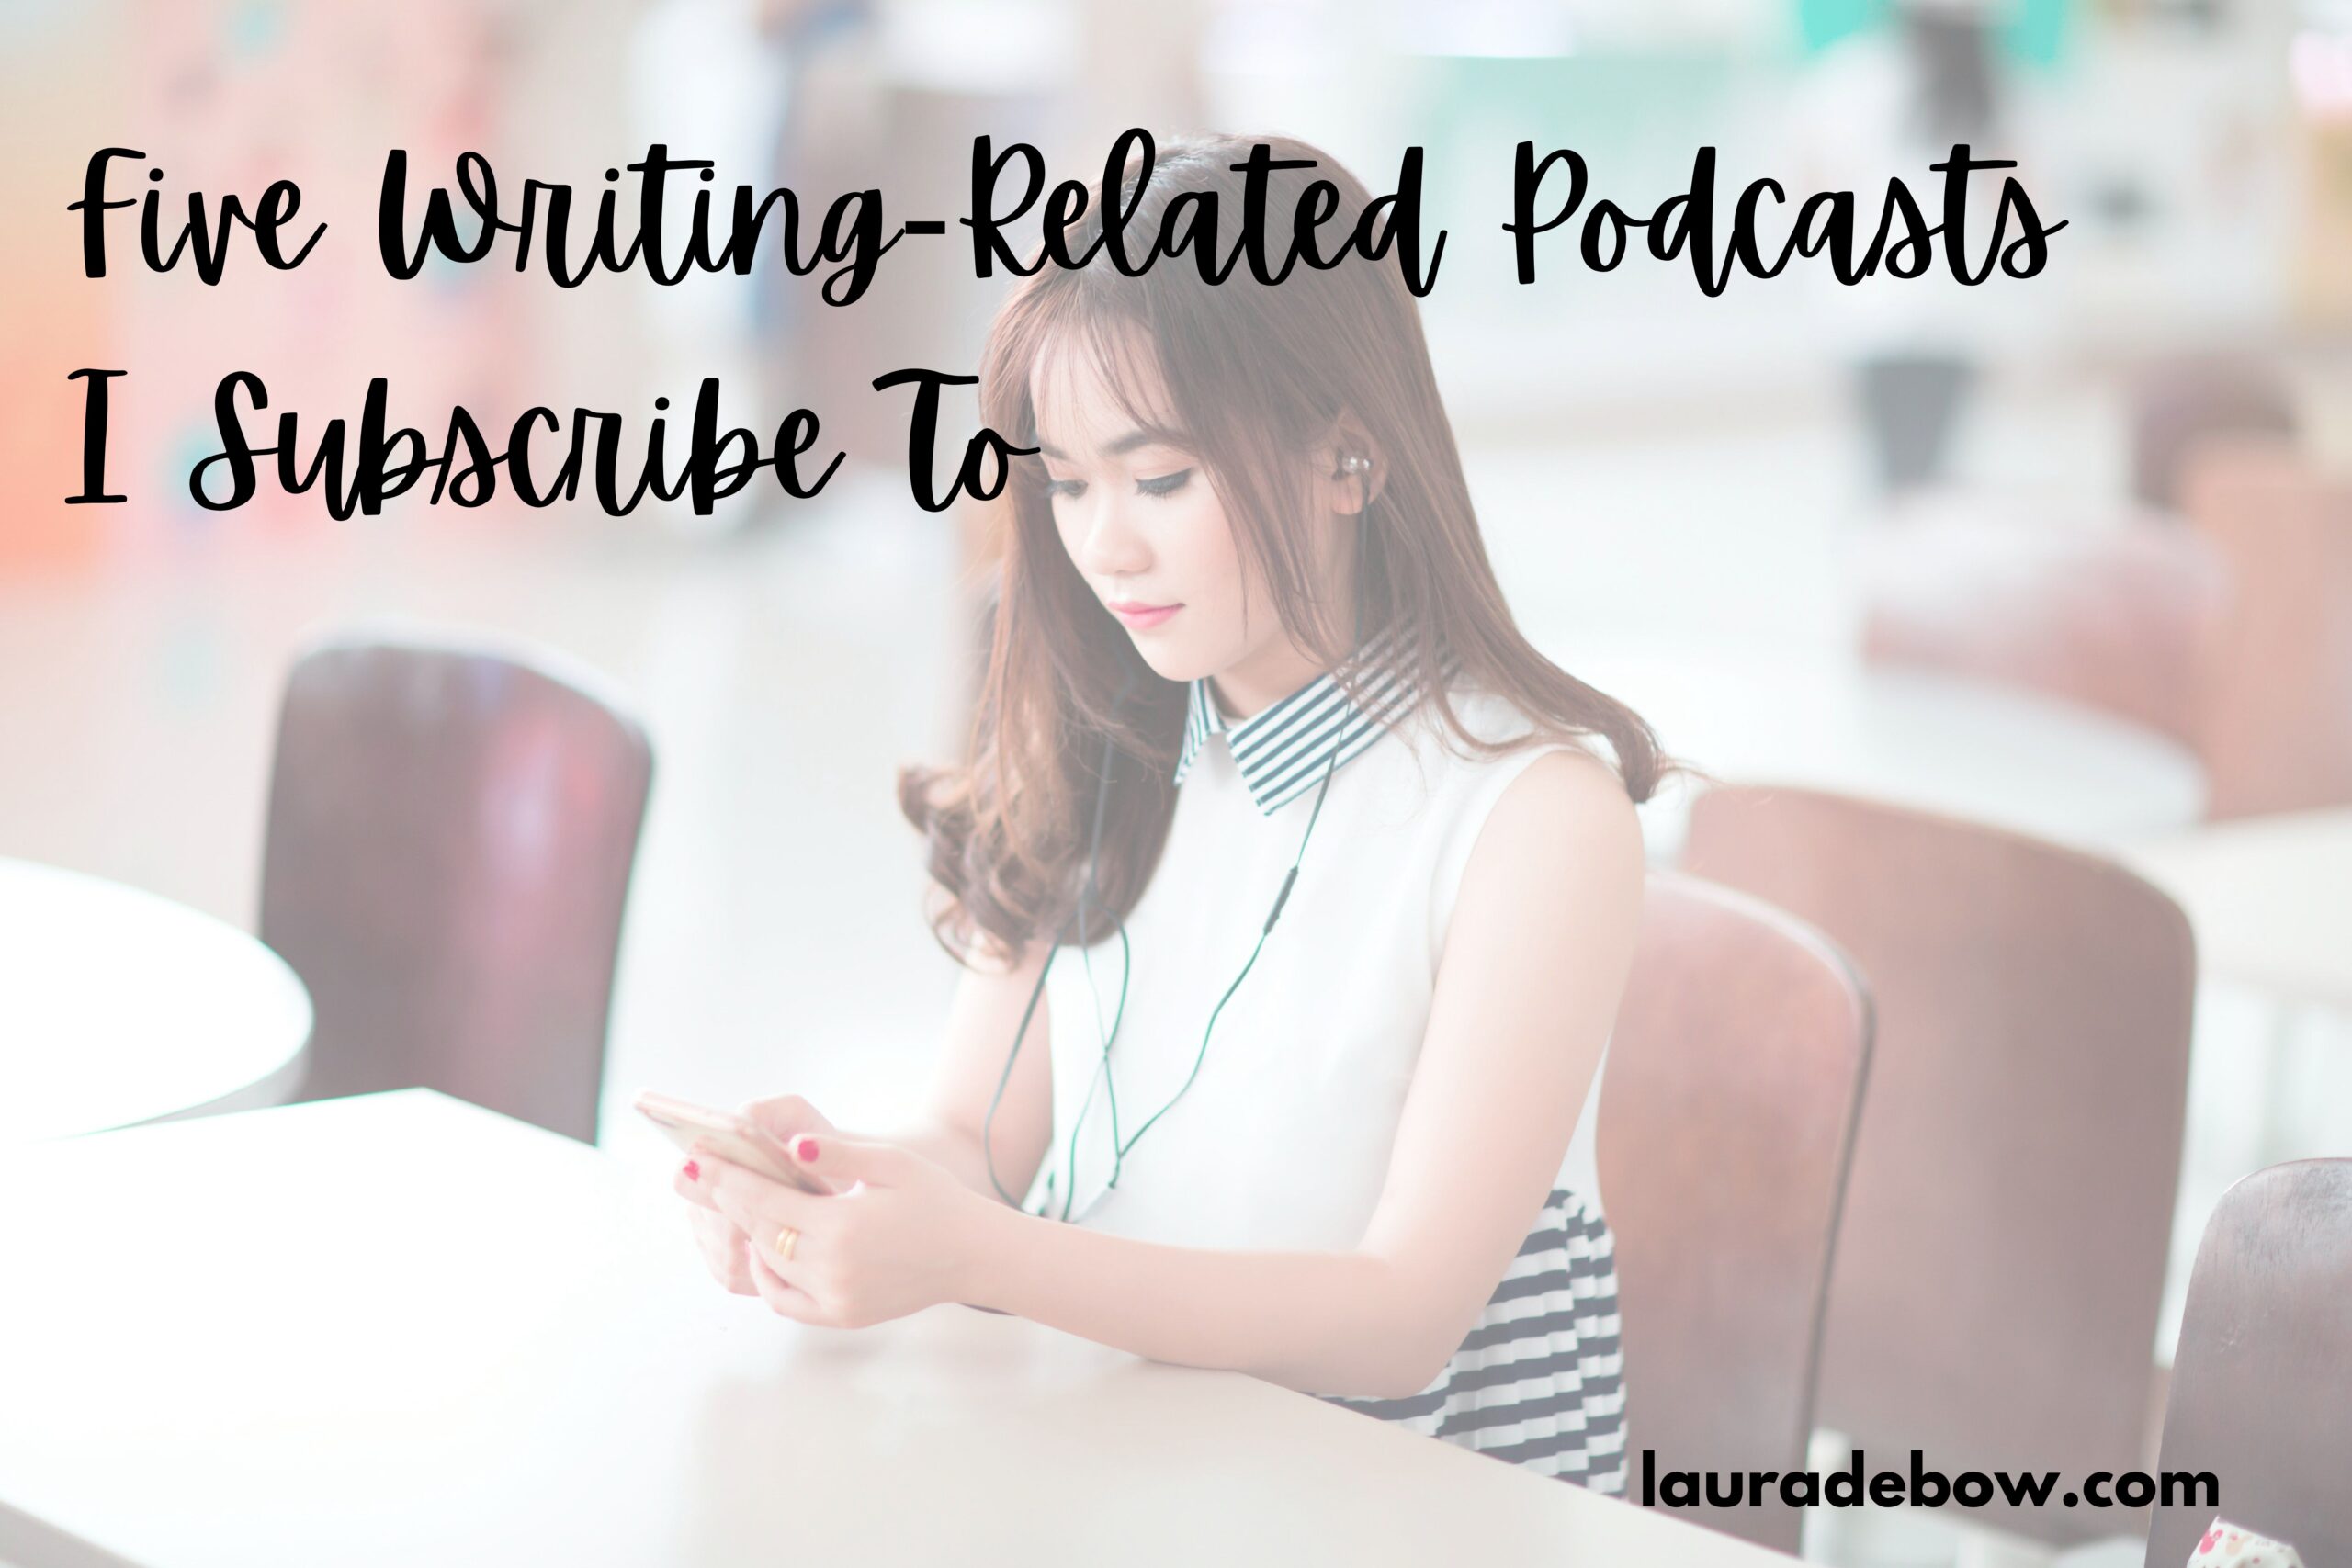 Five writing podcasts I subscribe to